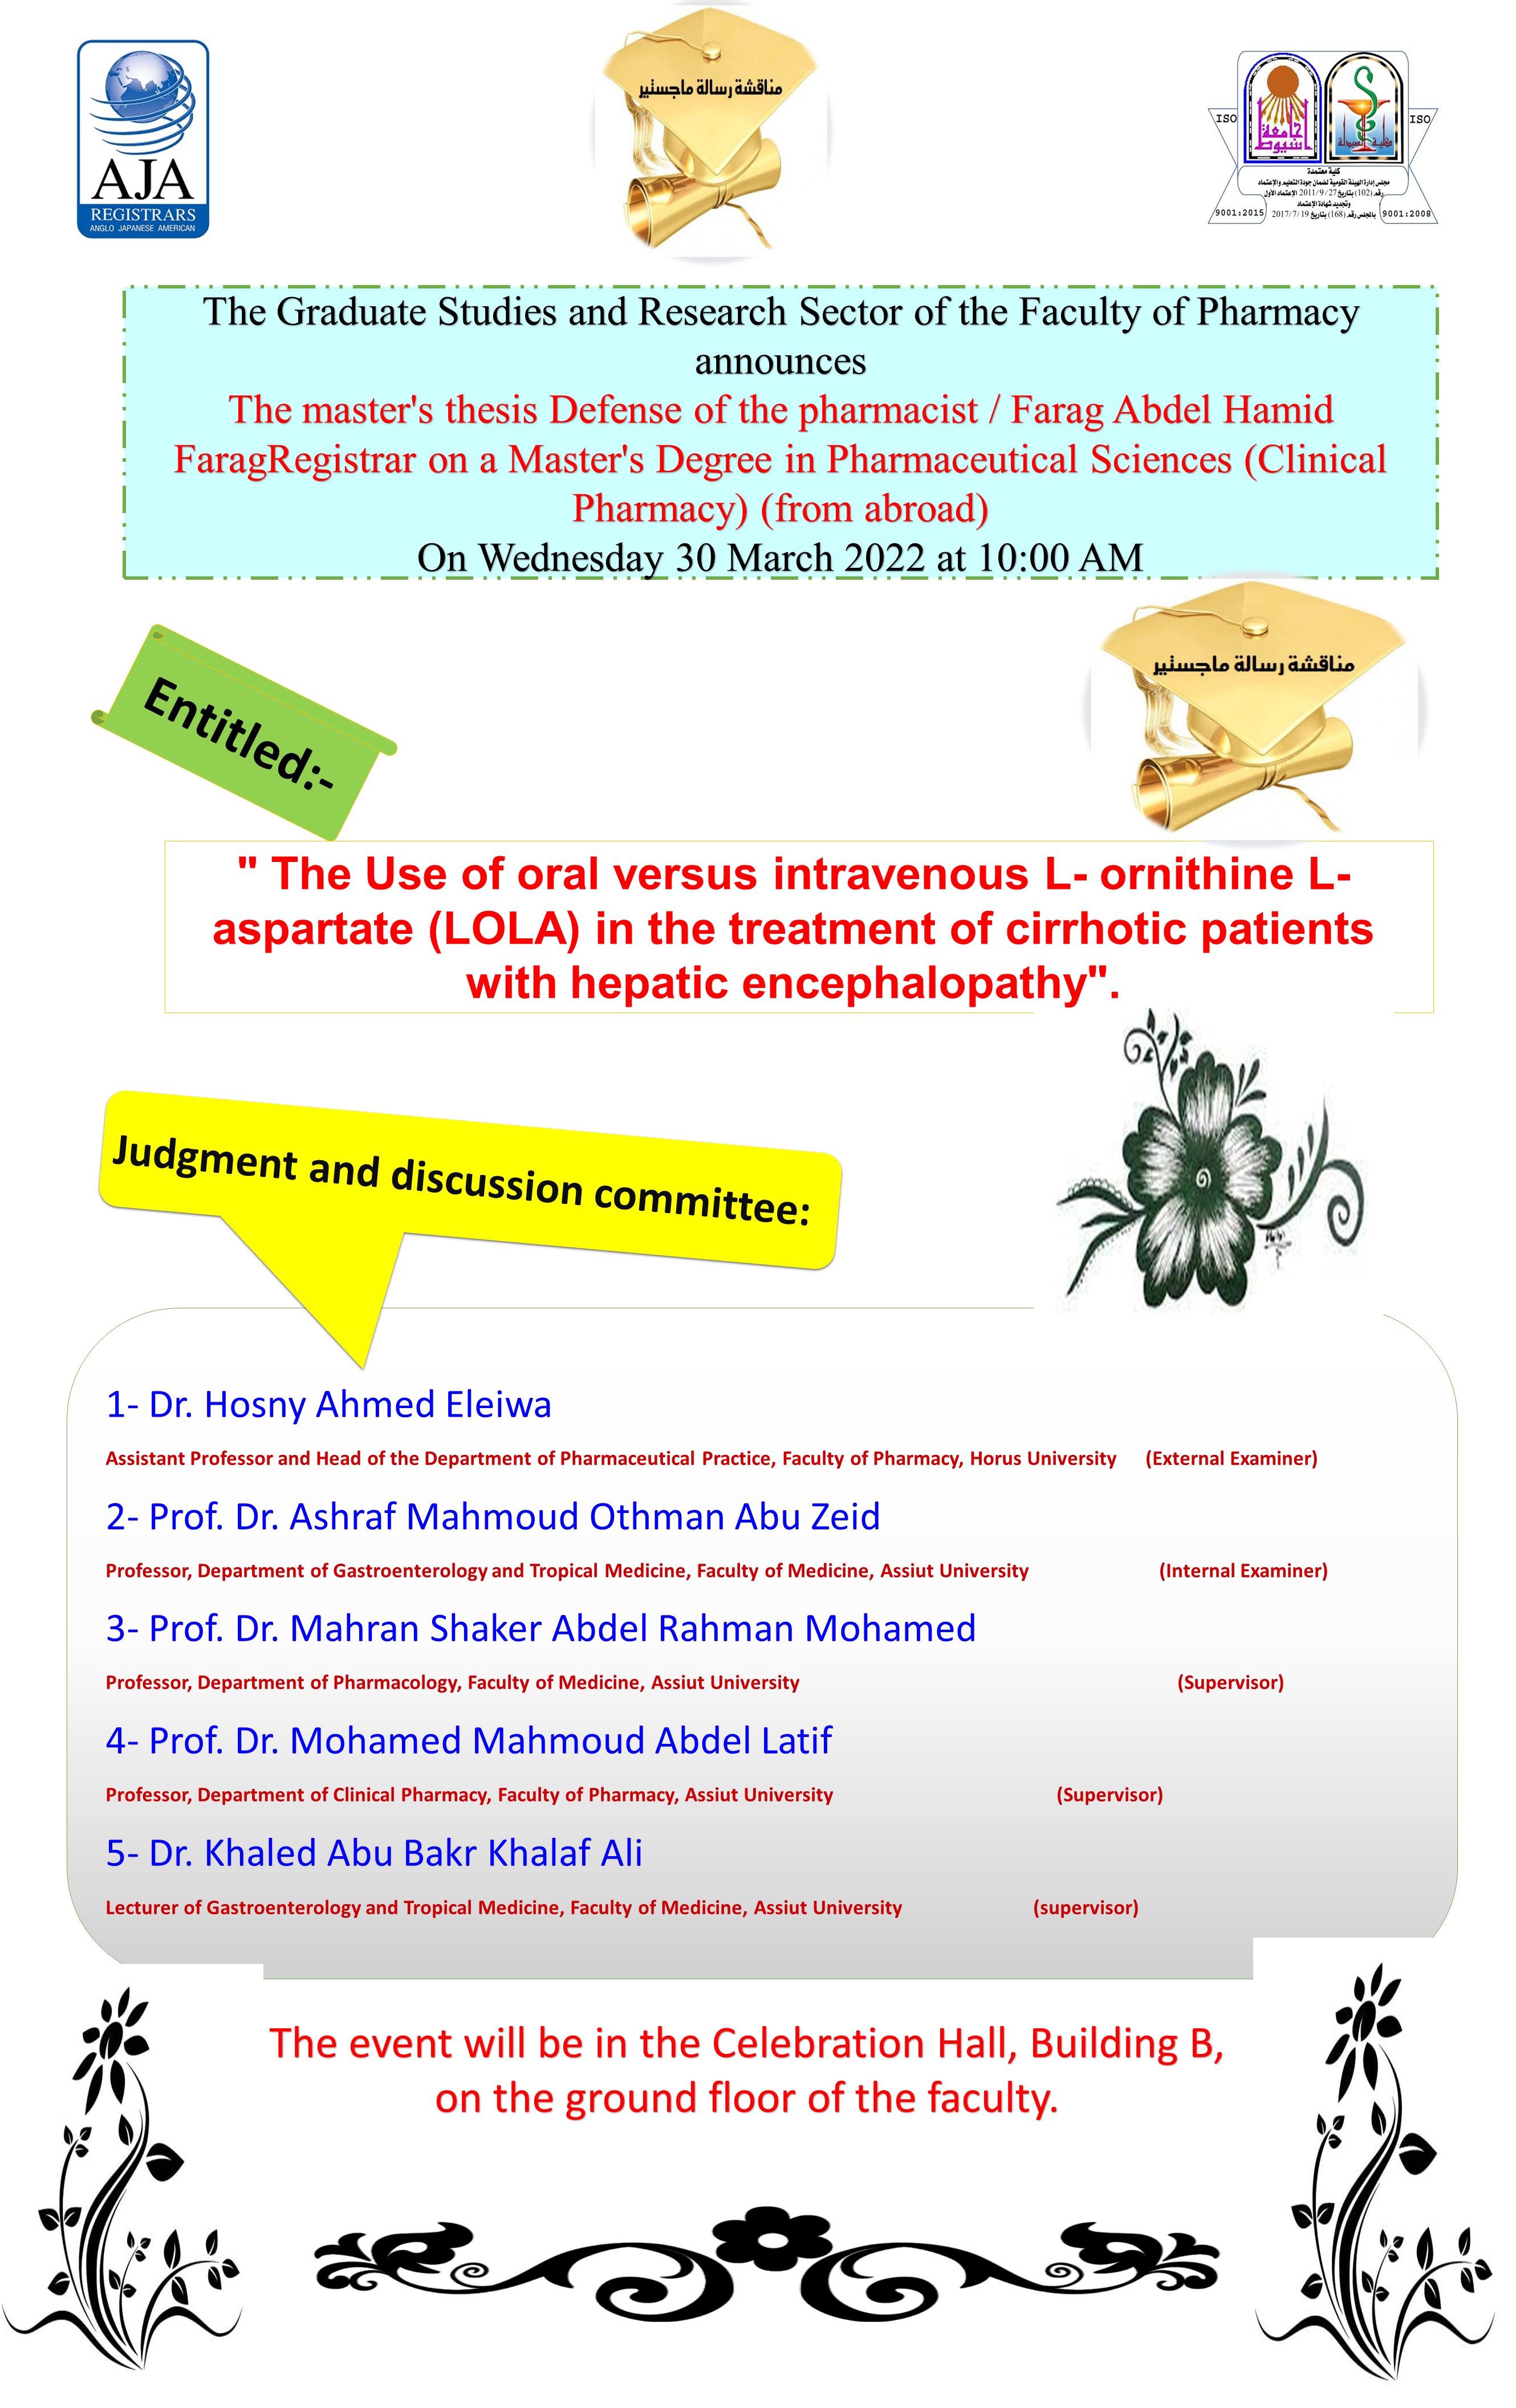 The master's thesis Defense of the pharmacist / Farag Abdel Hamid Farag Registrar on a Master's Degree in Pharmaceutical Sciences (Clinical Pharmacy) (from abroad)  On Wednesday 30 March 2022 at 10:00 AM